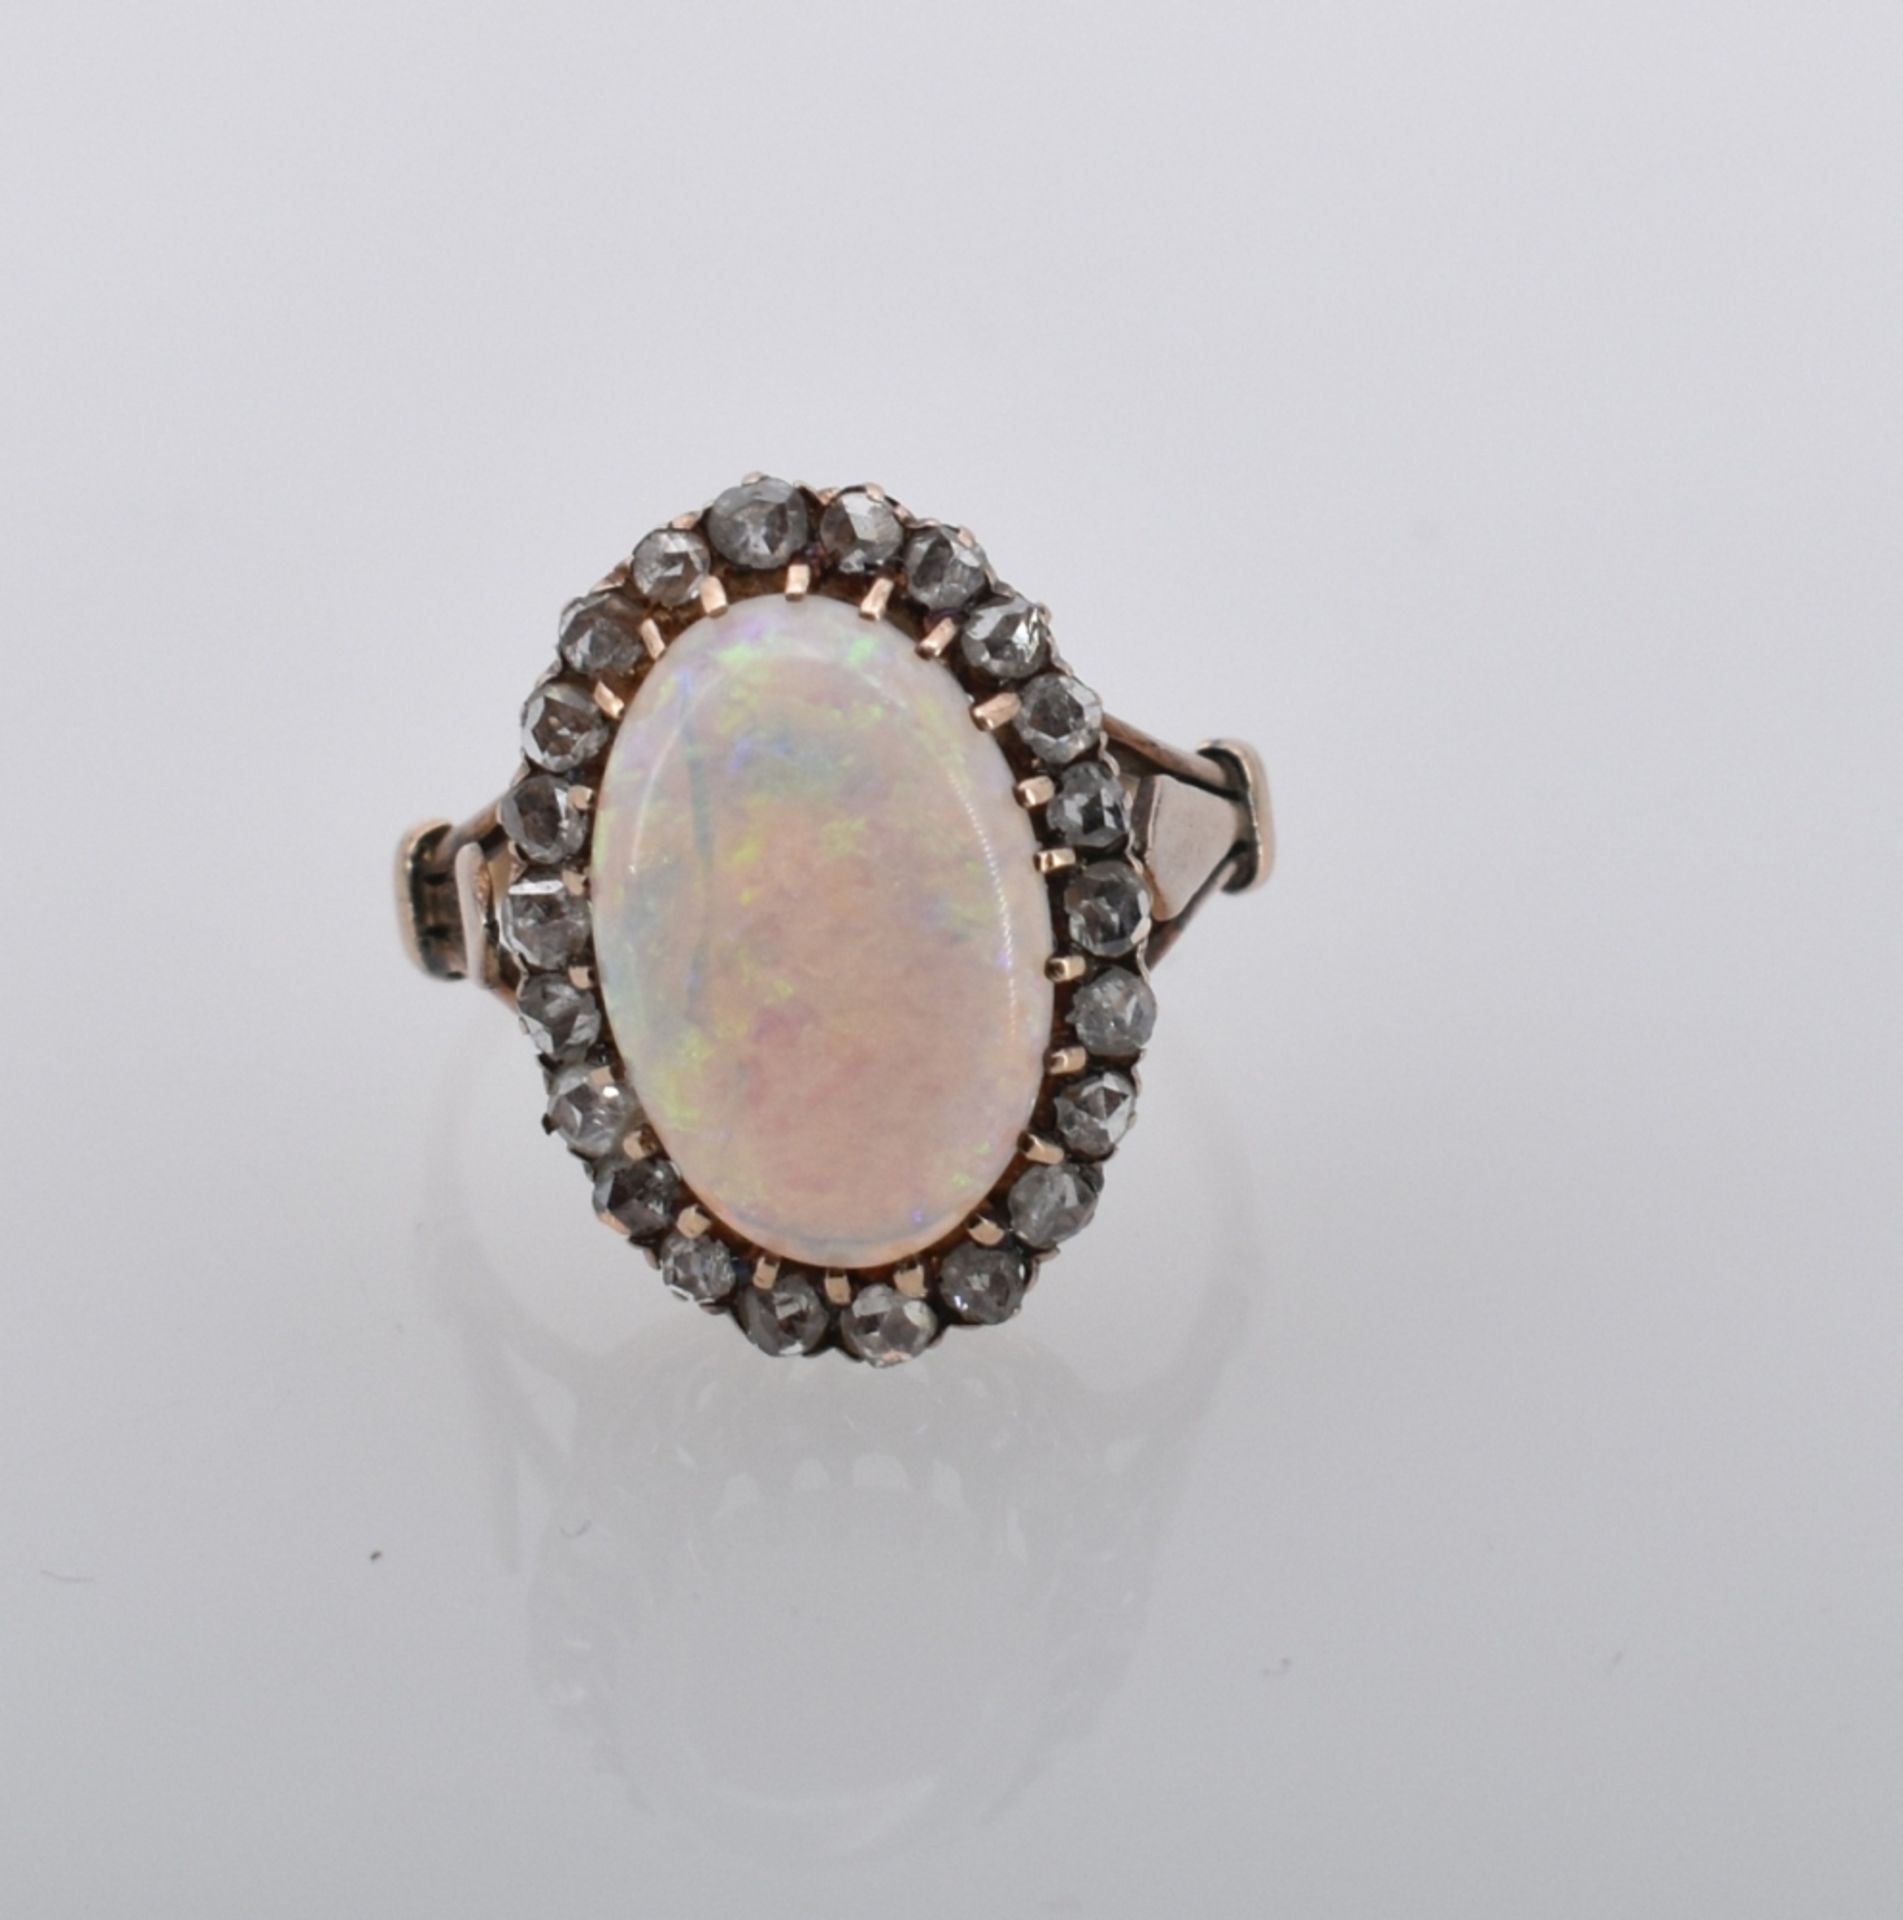 Sehr feiner Opal-Diamant-Ring, 20. Jh. - Image 3 of 3